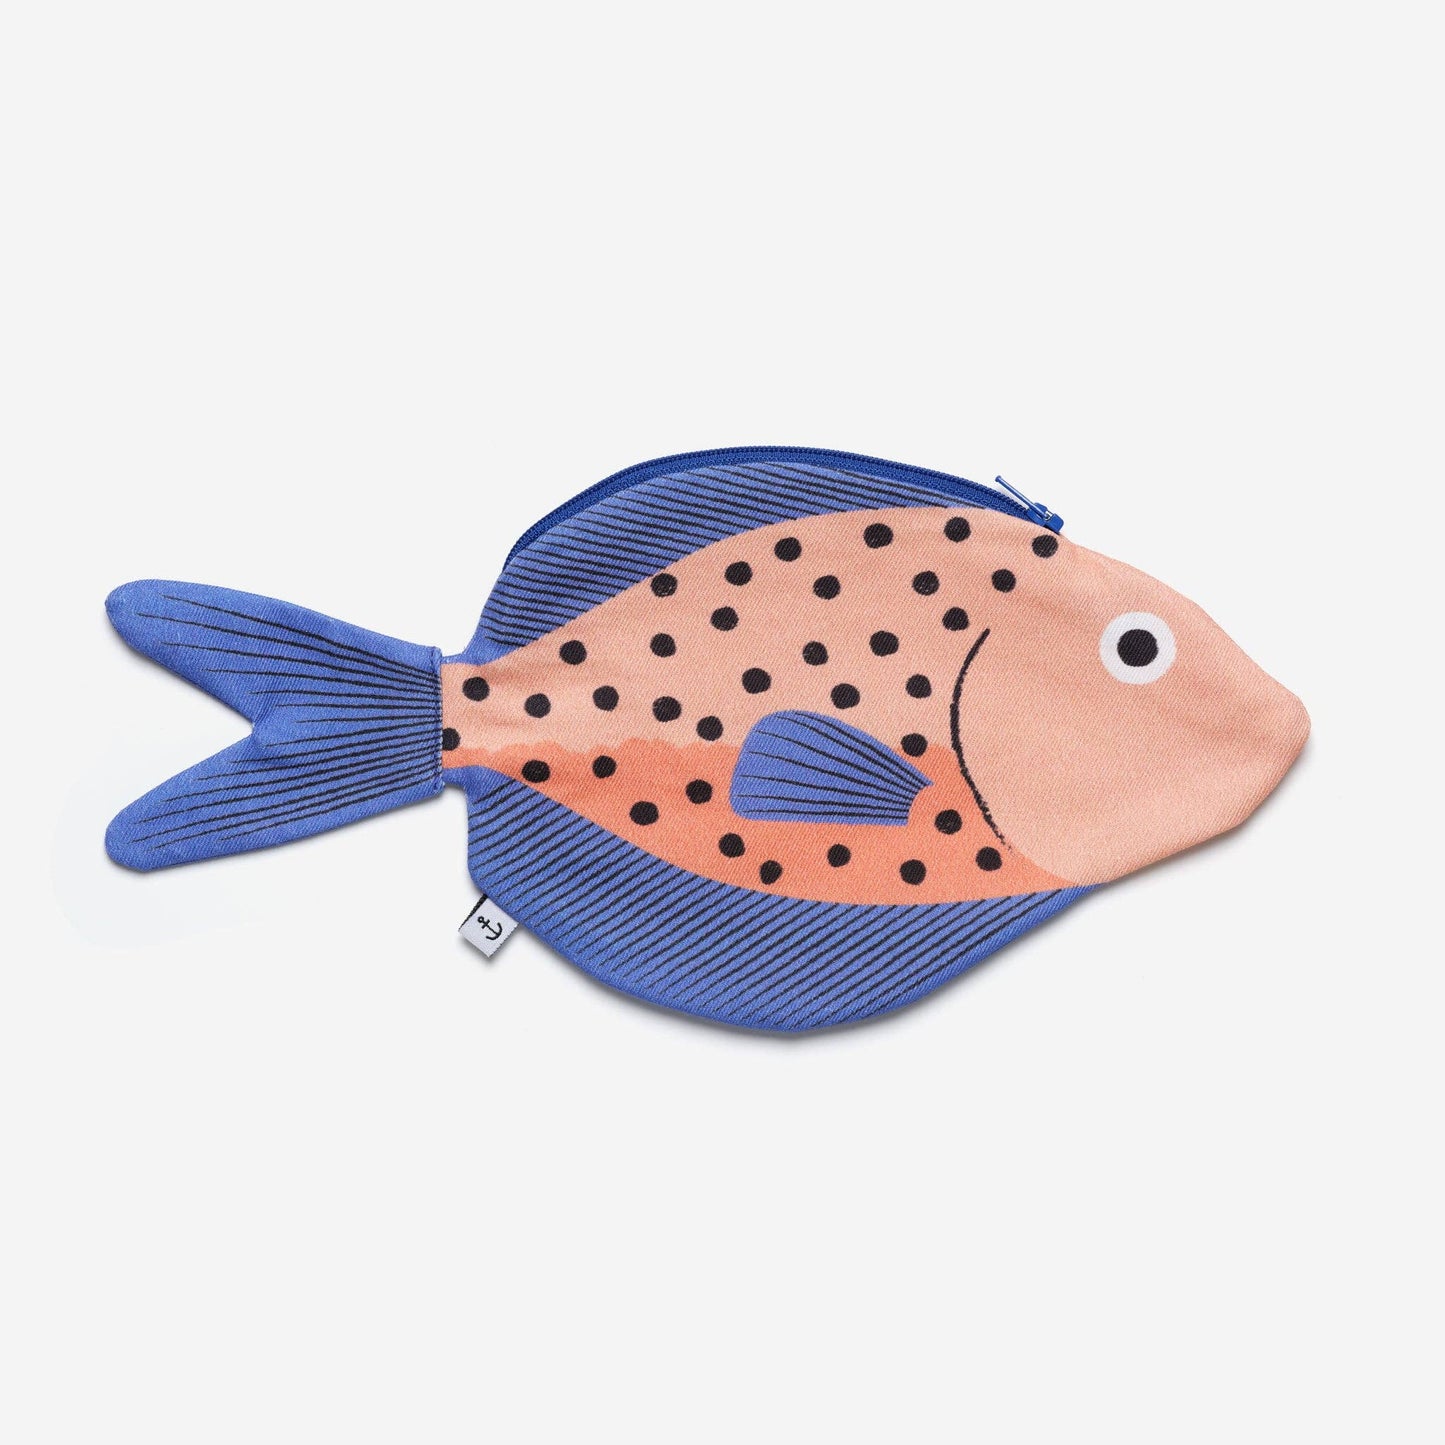 Roughy fish zippered pouch -- body is light red with black dots, fins are blue with stripes 